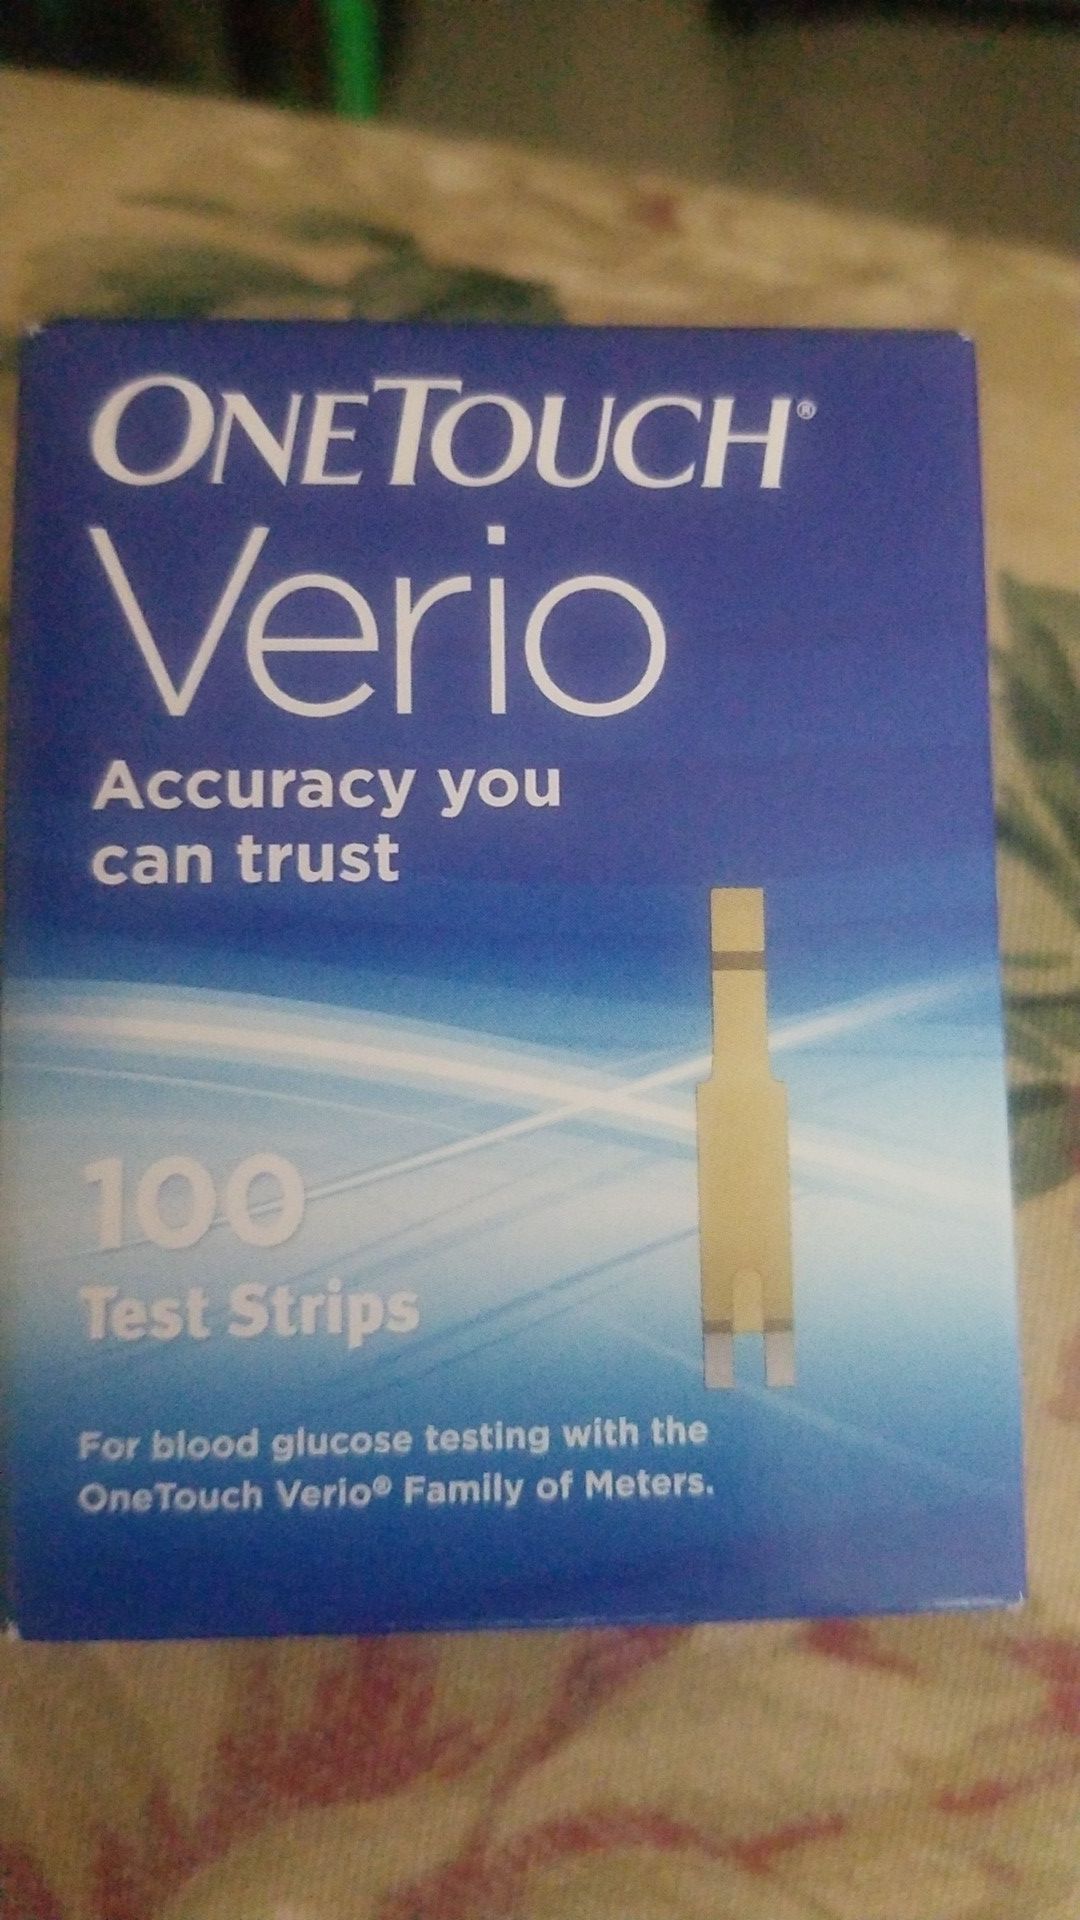 One touch 100 test strips